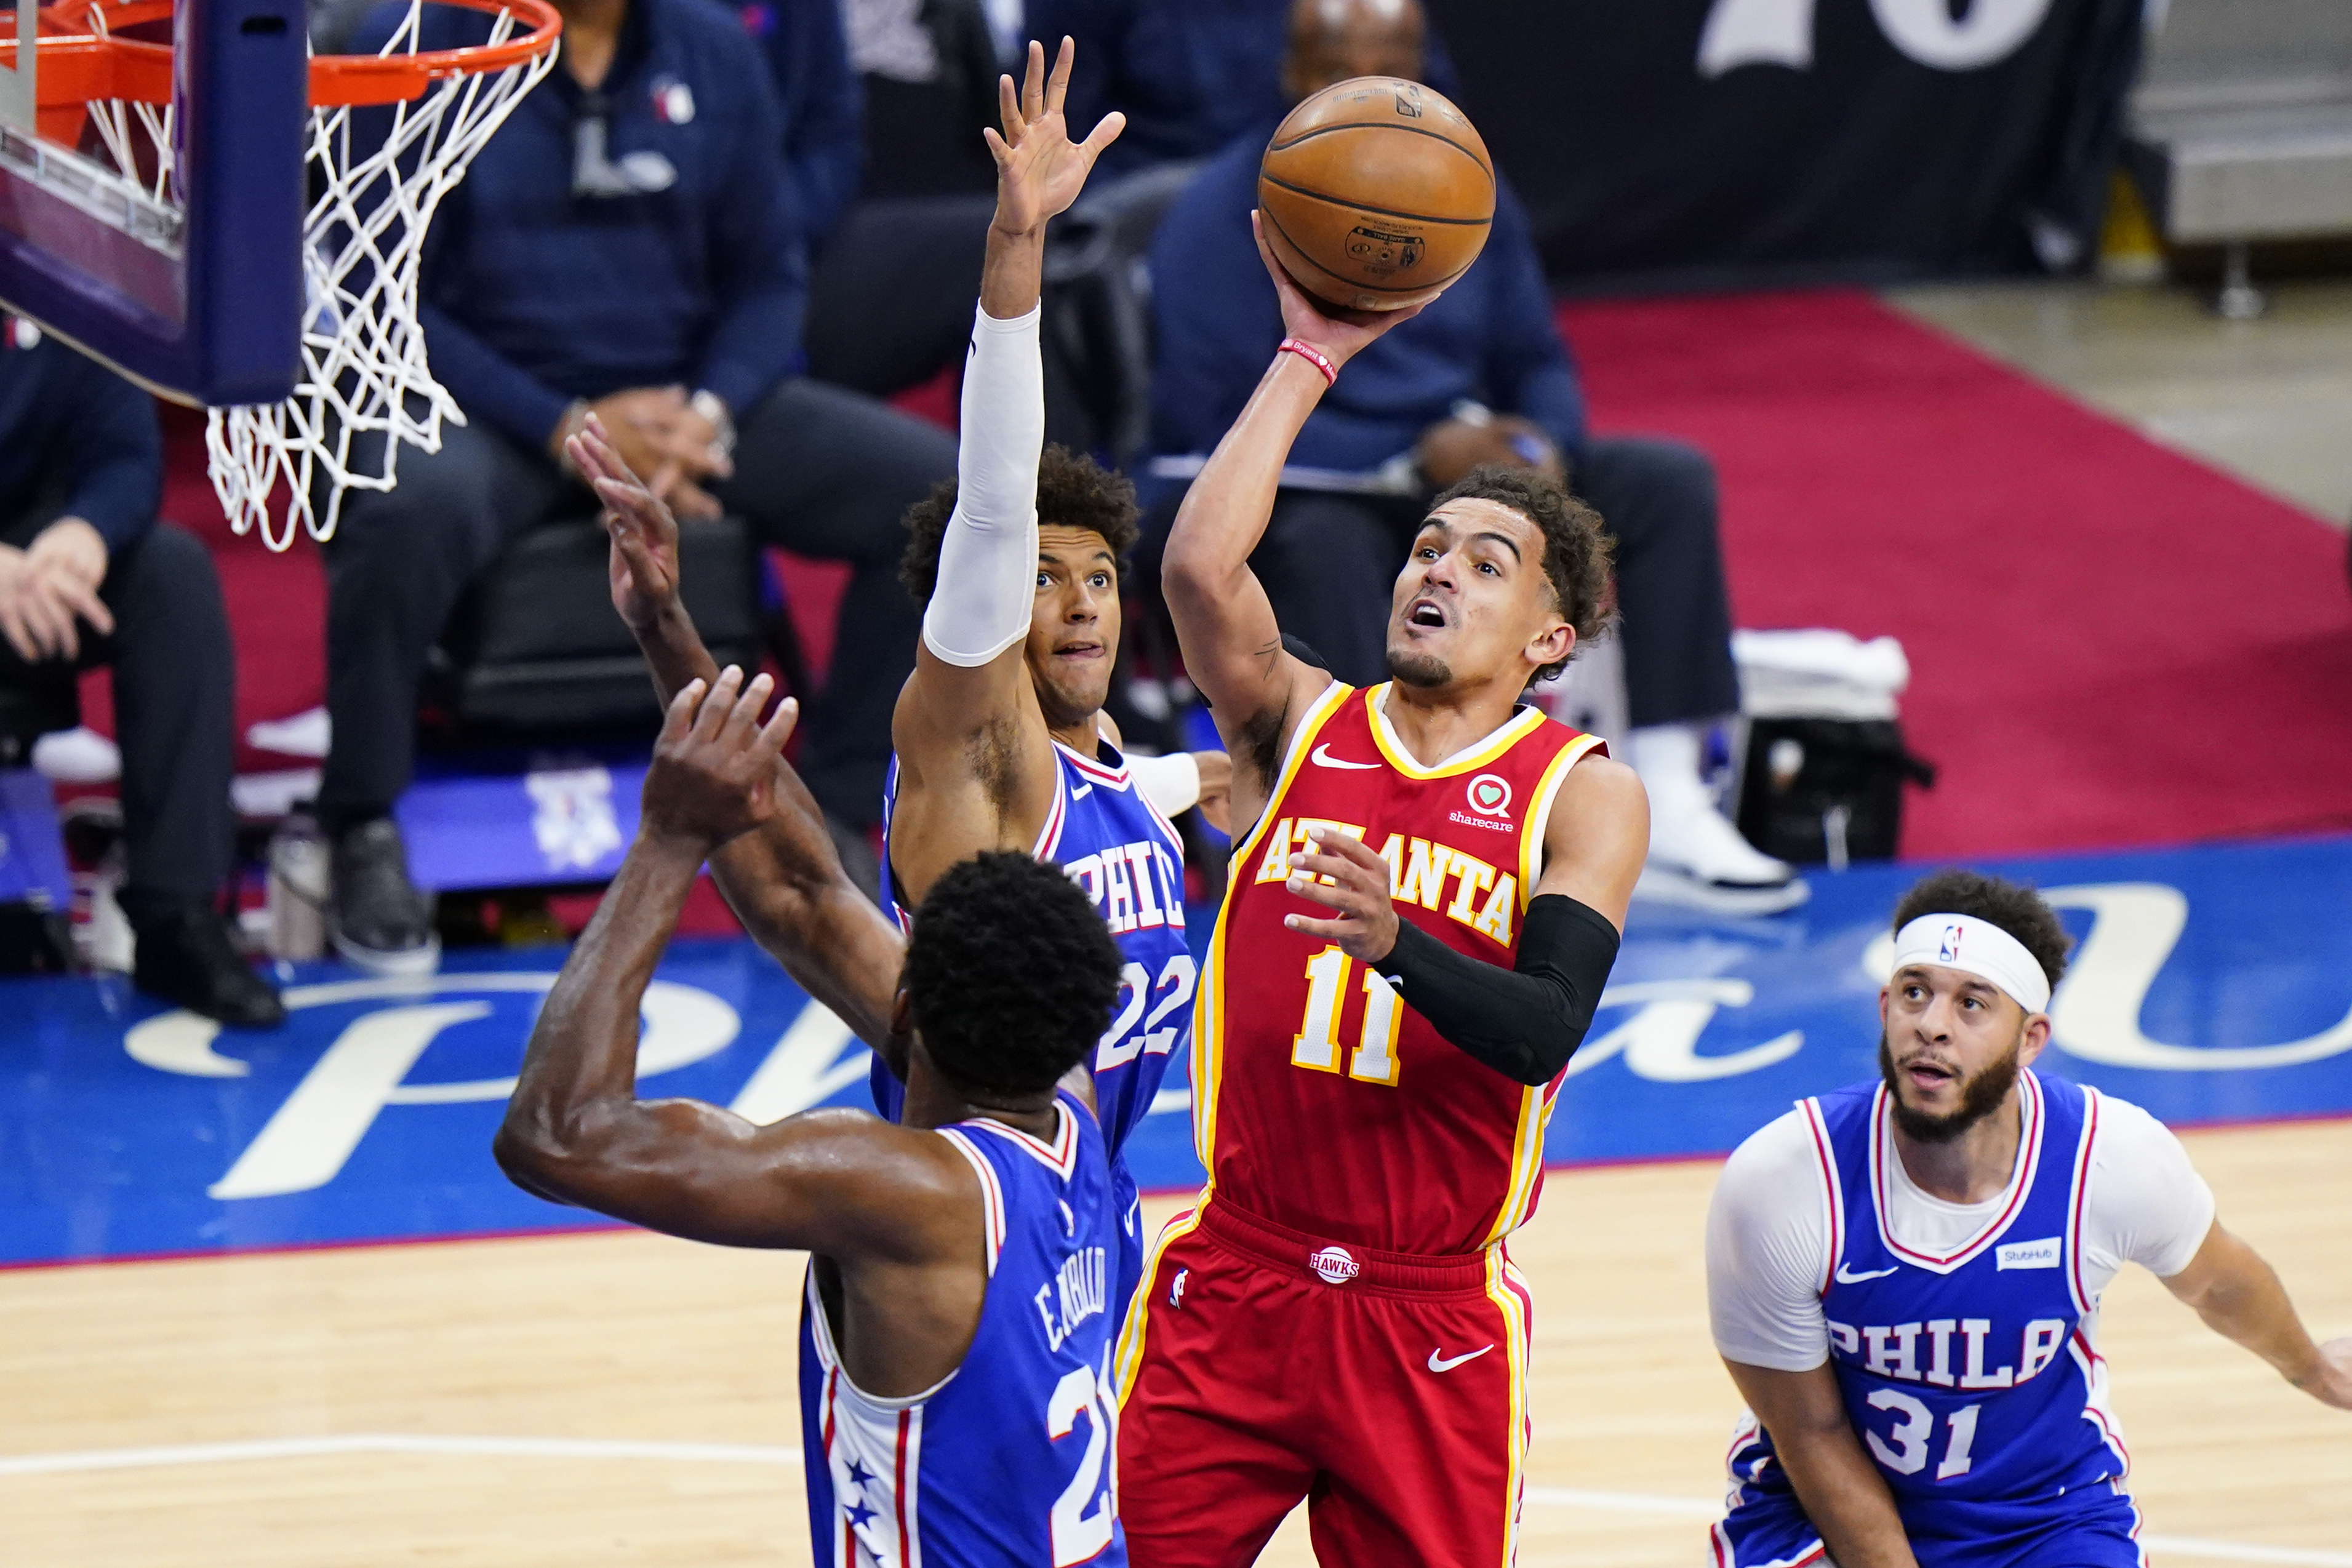 Young's 36 points help streaking Hawks drop Lakers, 129-121